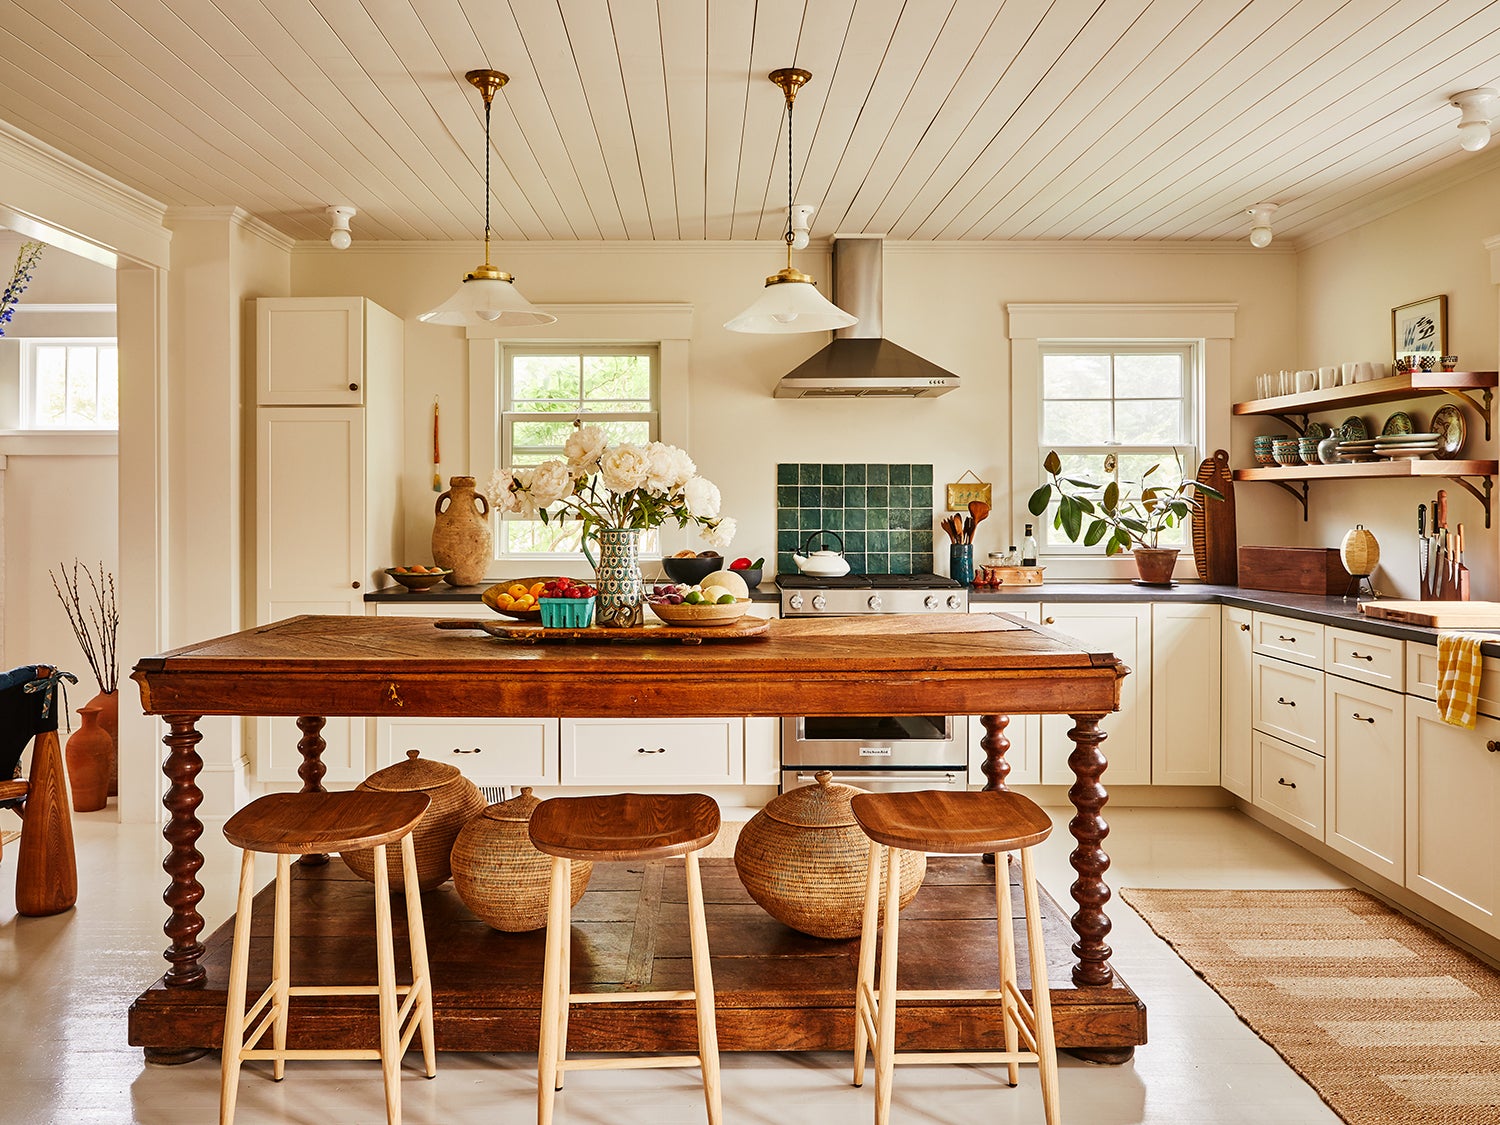 Kitchen with wooden island and wood barstools